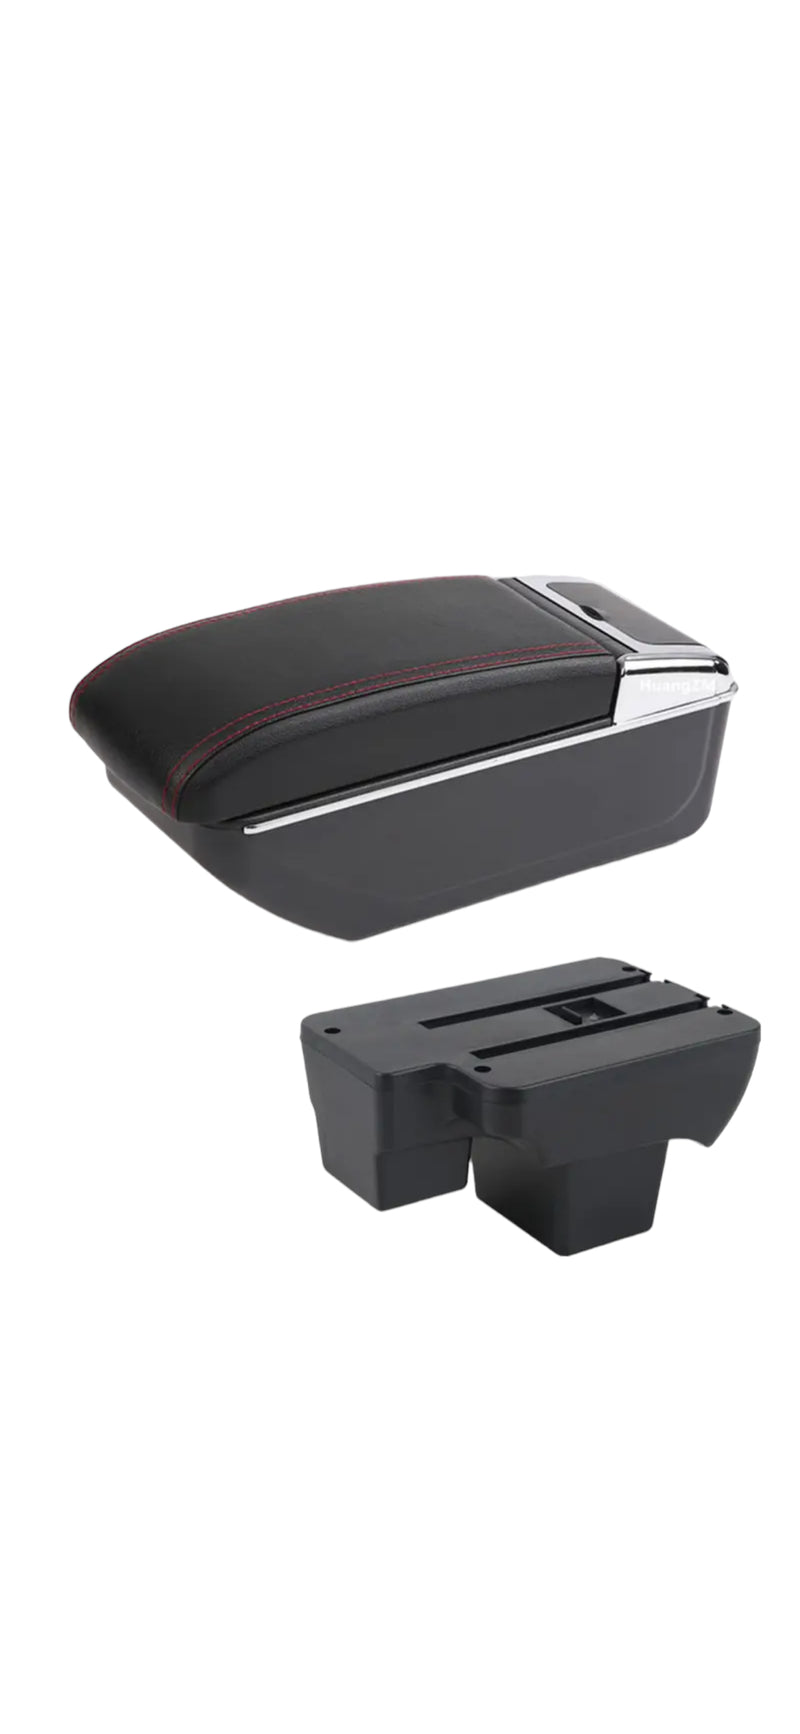 Volkswagen Polo MK6 Centre Armrest With Storage & USB Ports